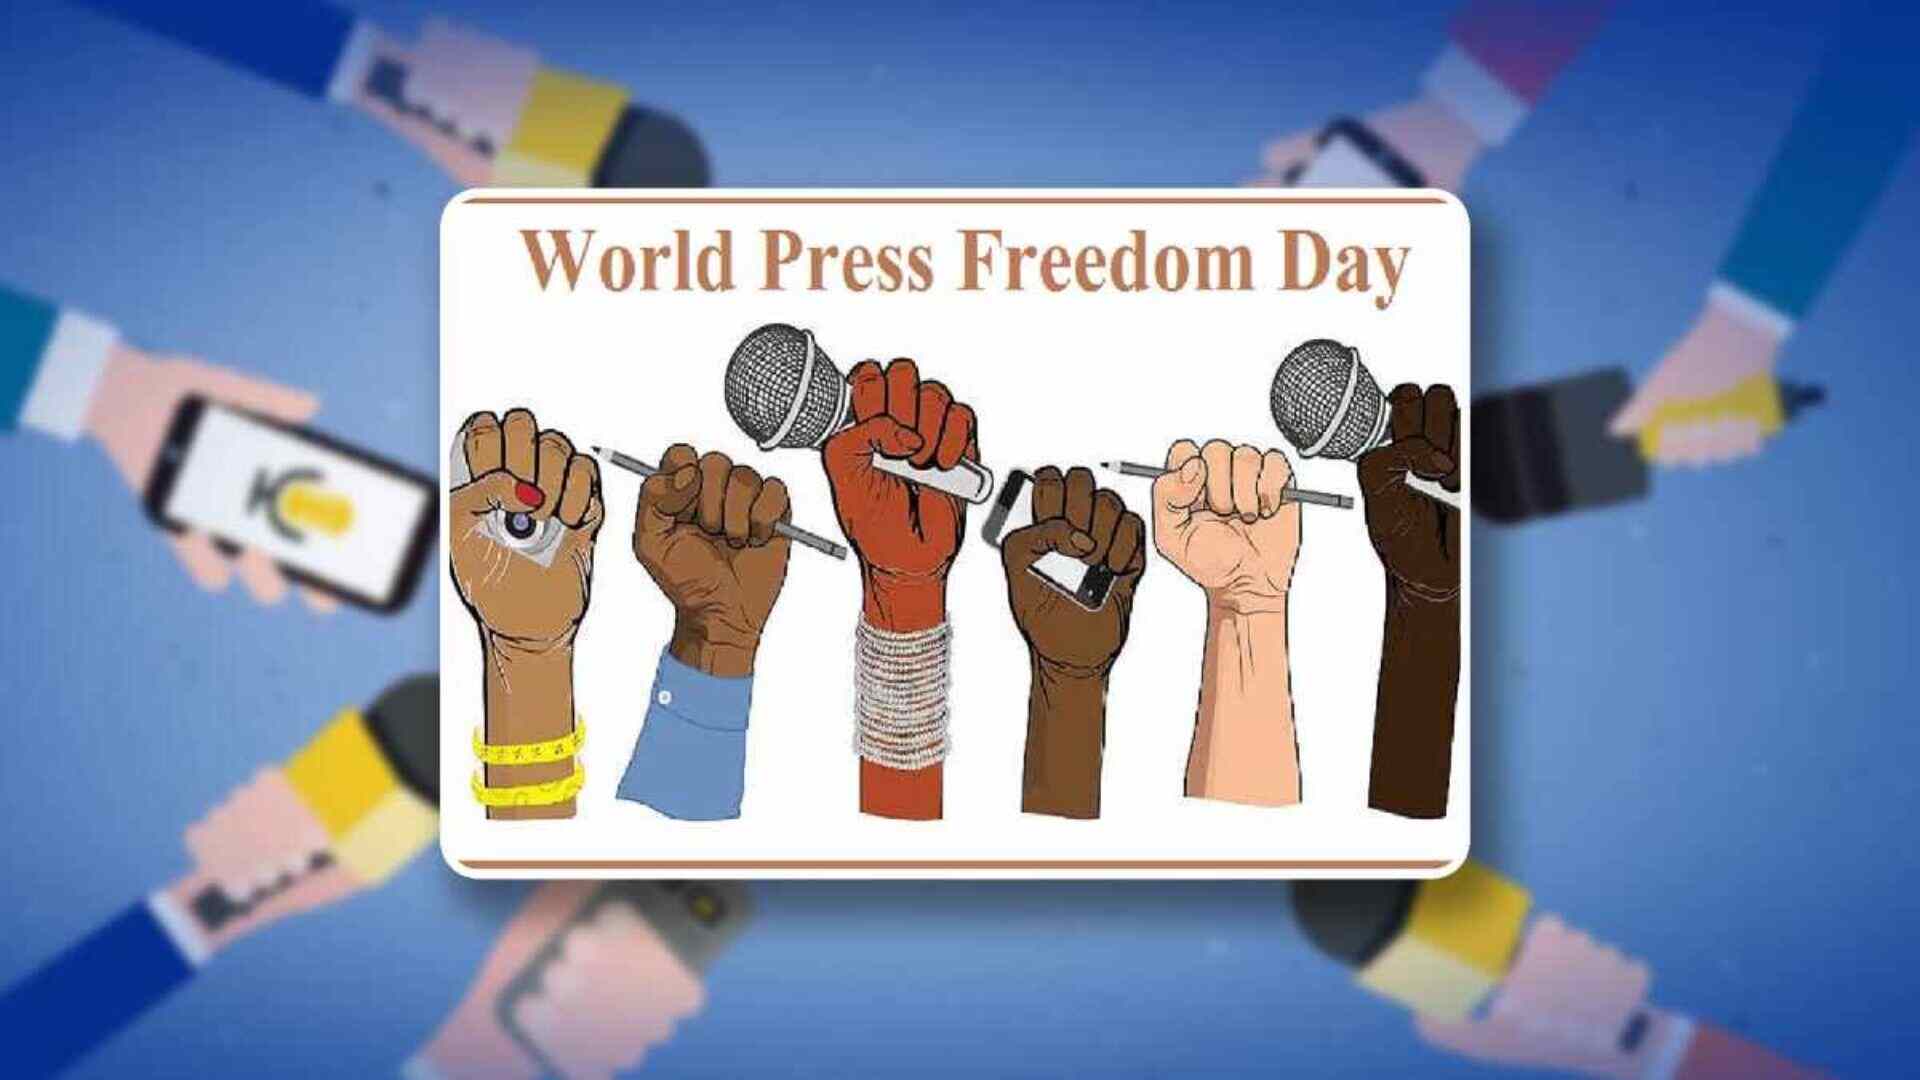 World Press Freedom Day: Date, Significance And Theme | All You Need To Know